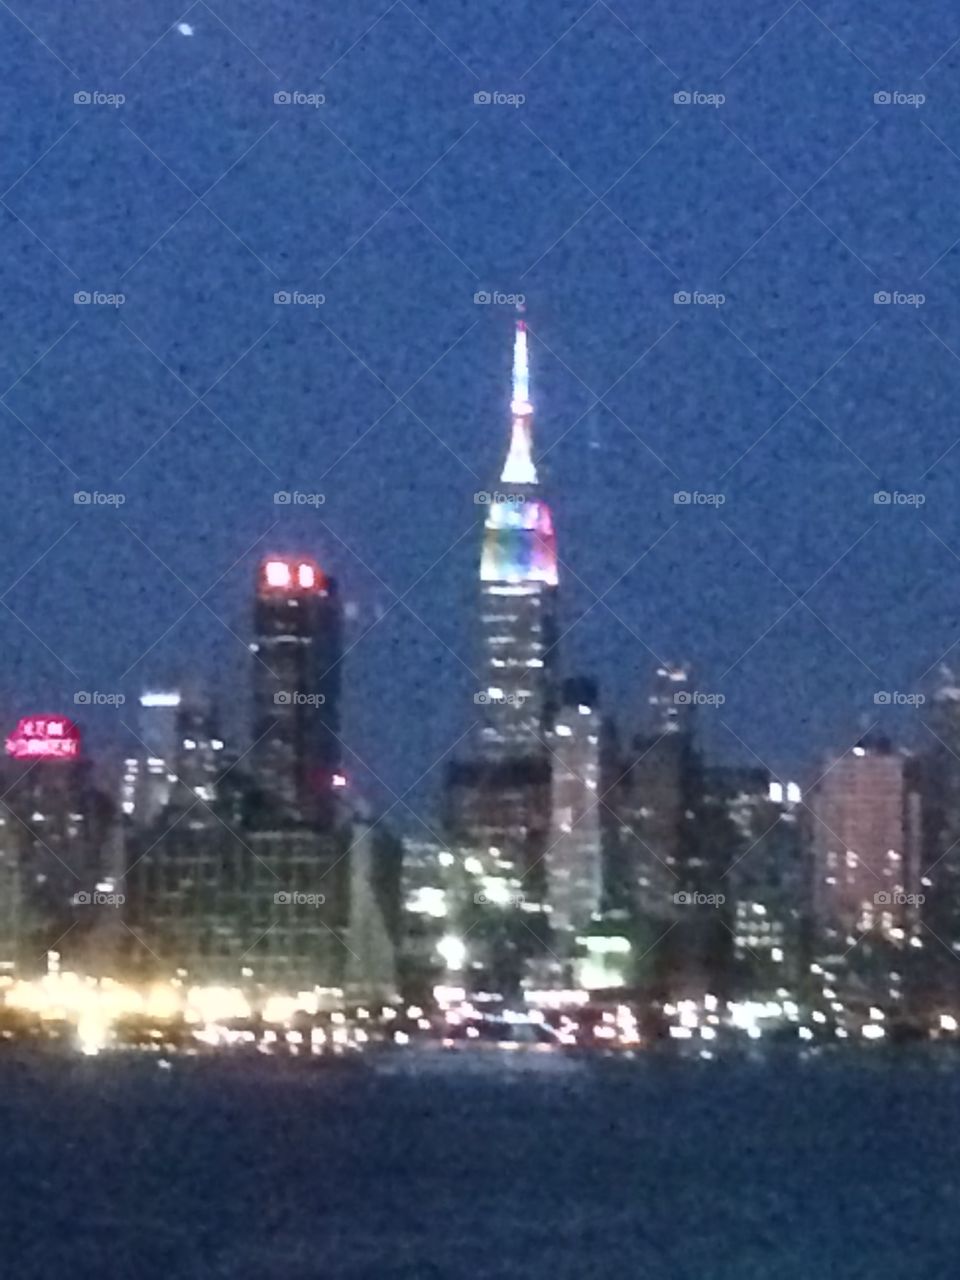 Empire State Building lighting